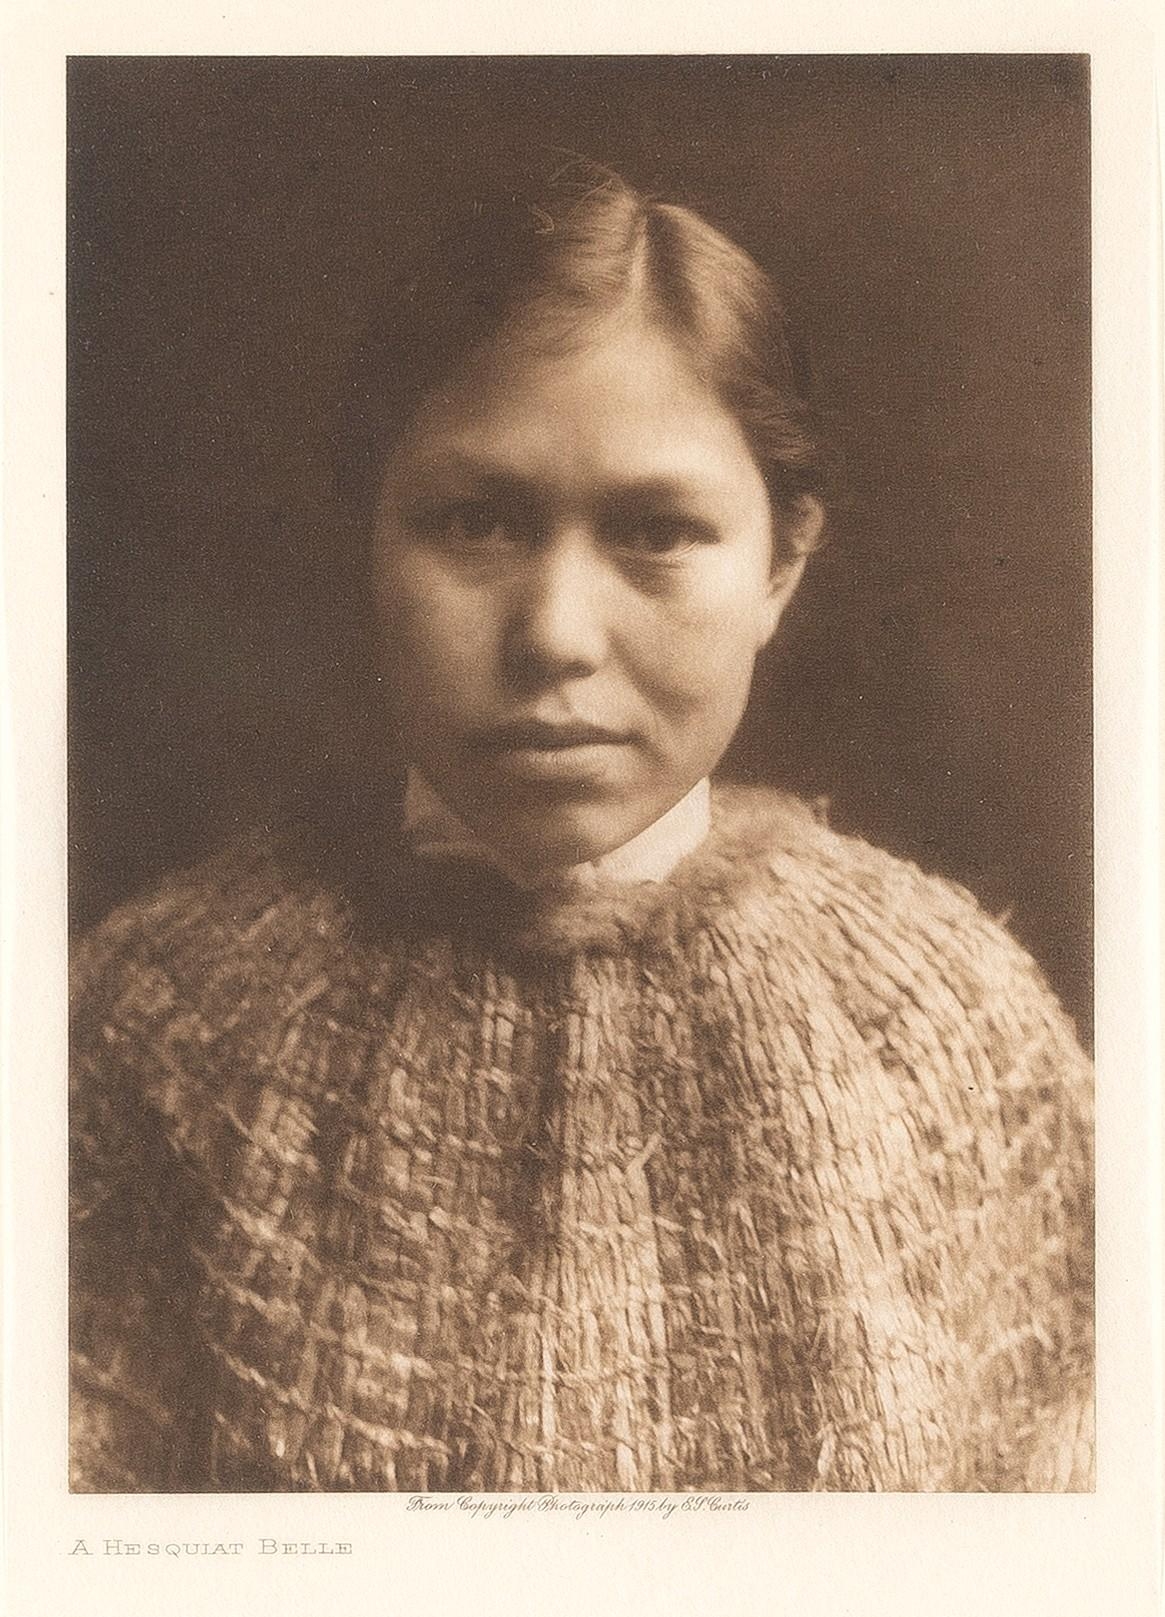 A Hesquiat Belle by Edward S. Curtis, 1915